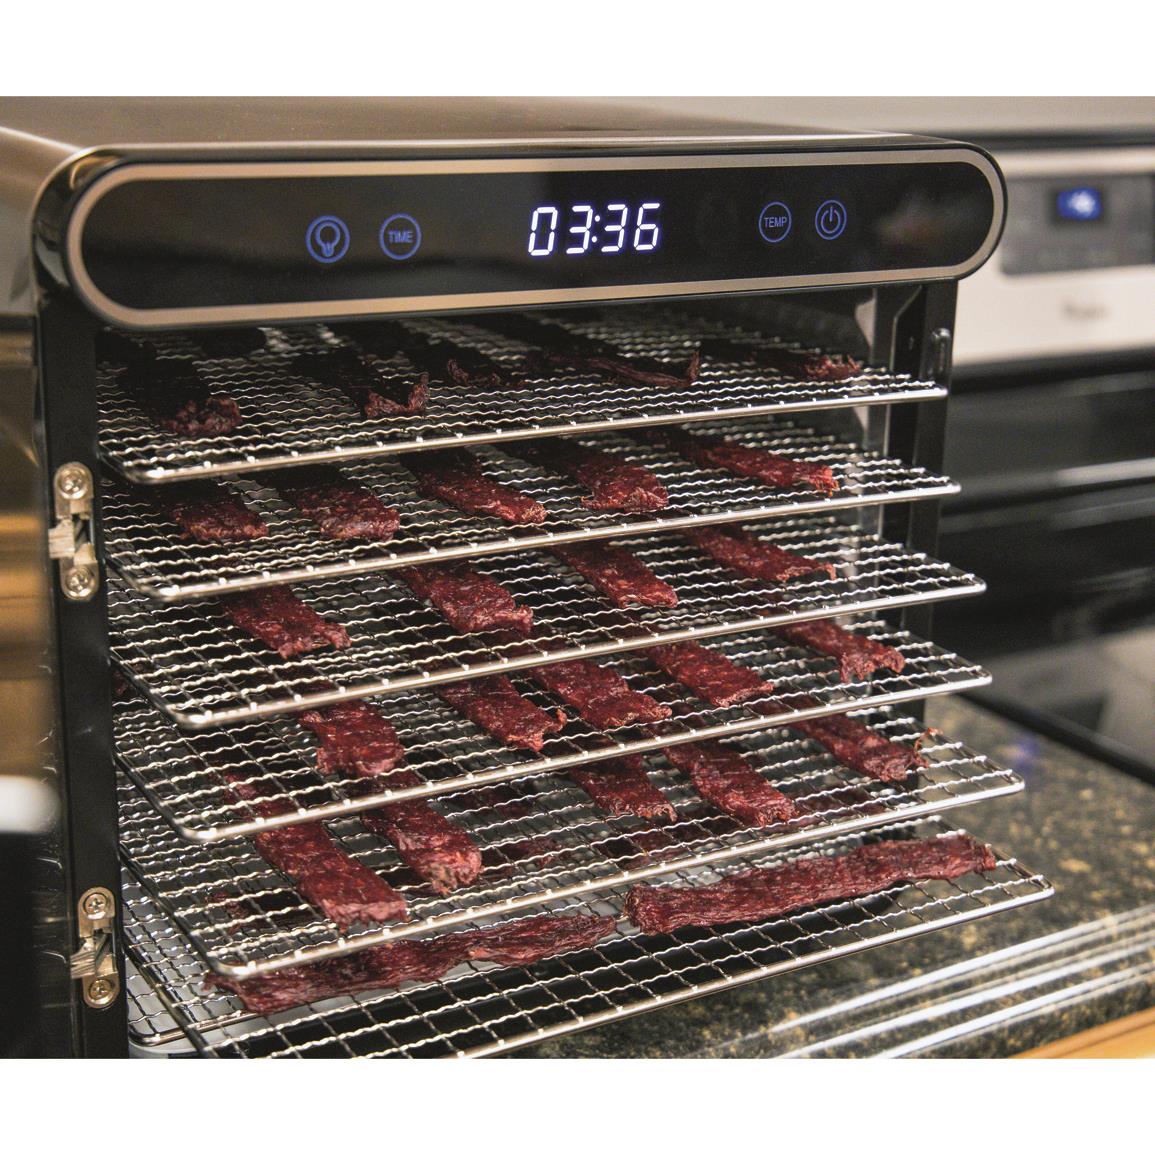 LEM 5-Tray Food Dehydrator with Clear Body - 736016, Dehydrators at  Sportsman's Guide